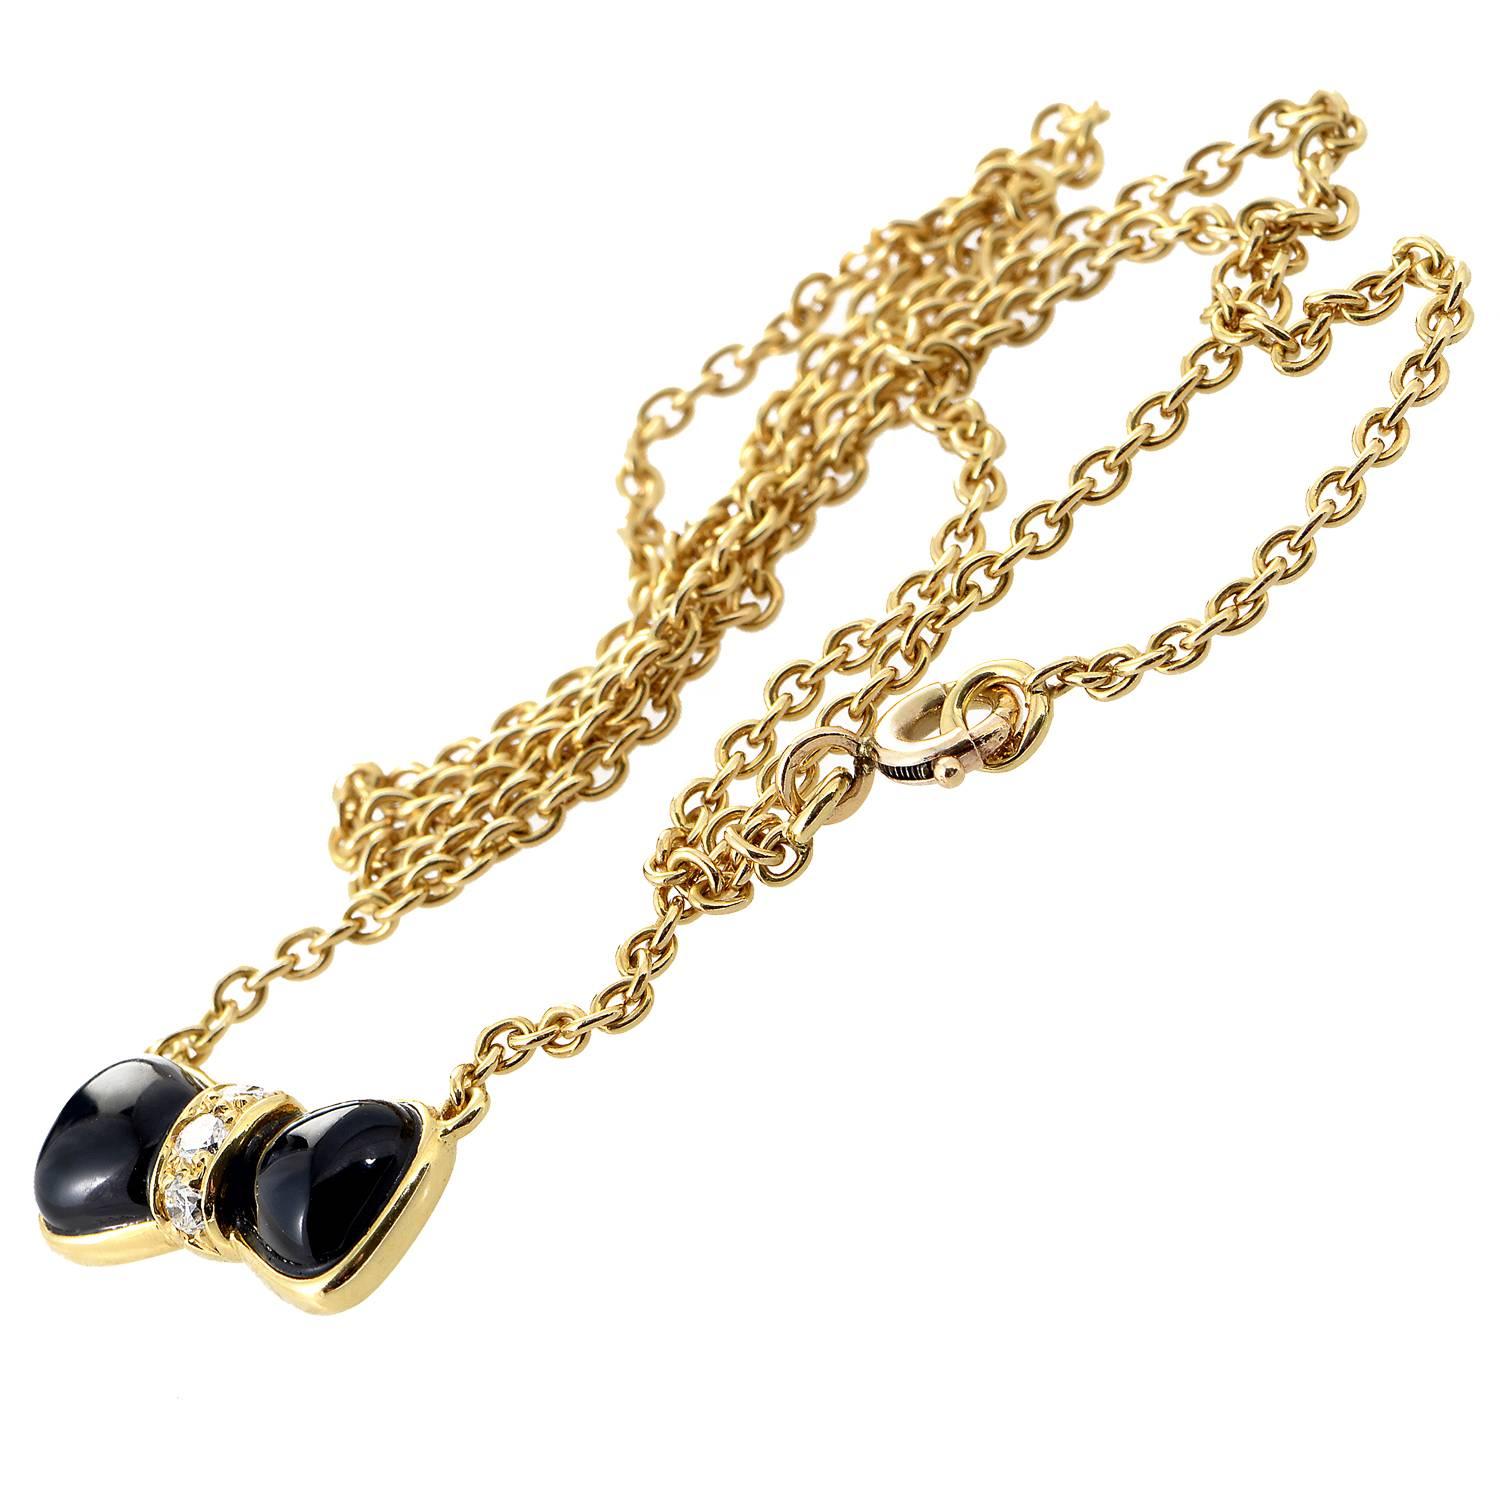 Simple and sweet are the perfect words to describe this pendant necklace from Van Cleef & Arpels. The necklace is made of 18K yellow gold, and features a bow-shaped pendant set with .15ct of diamonds and lustrous black onyx.
Pendant Dimensions: 0.63